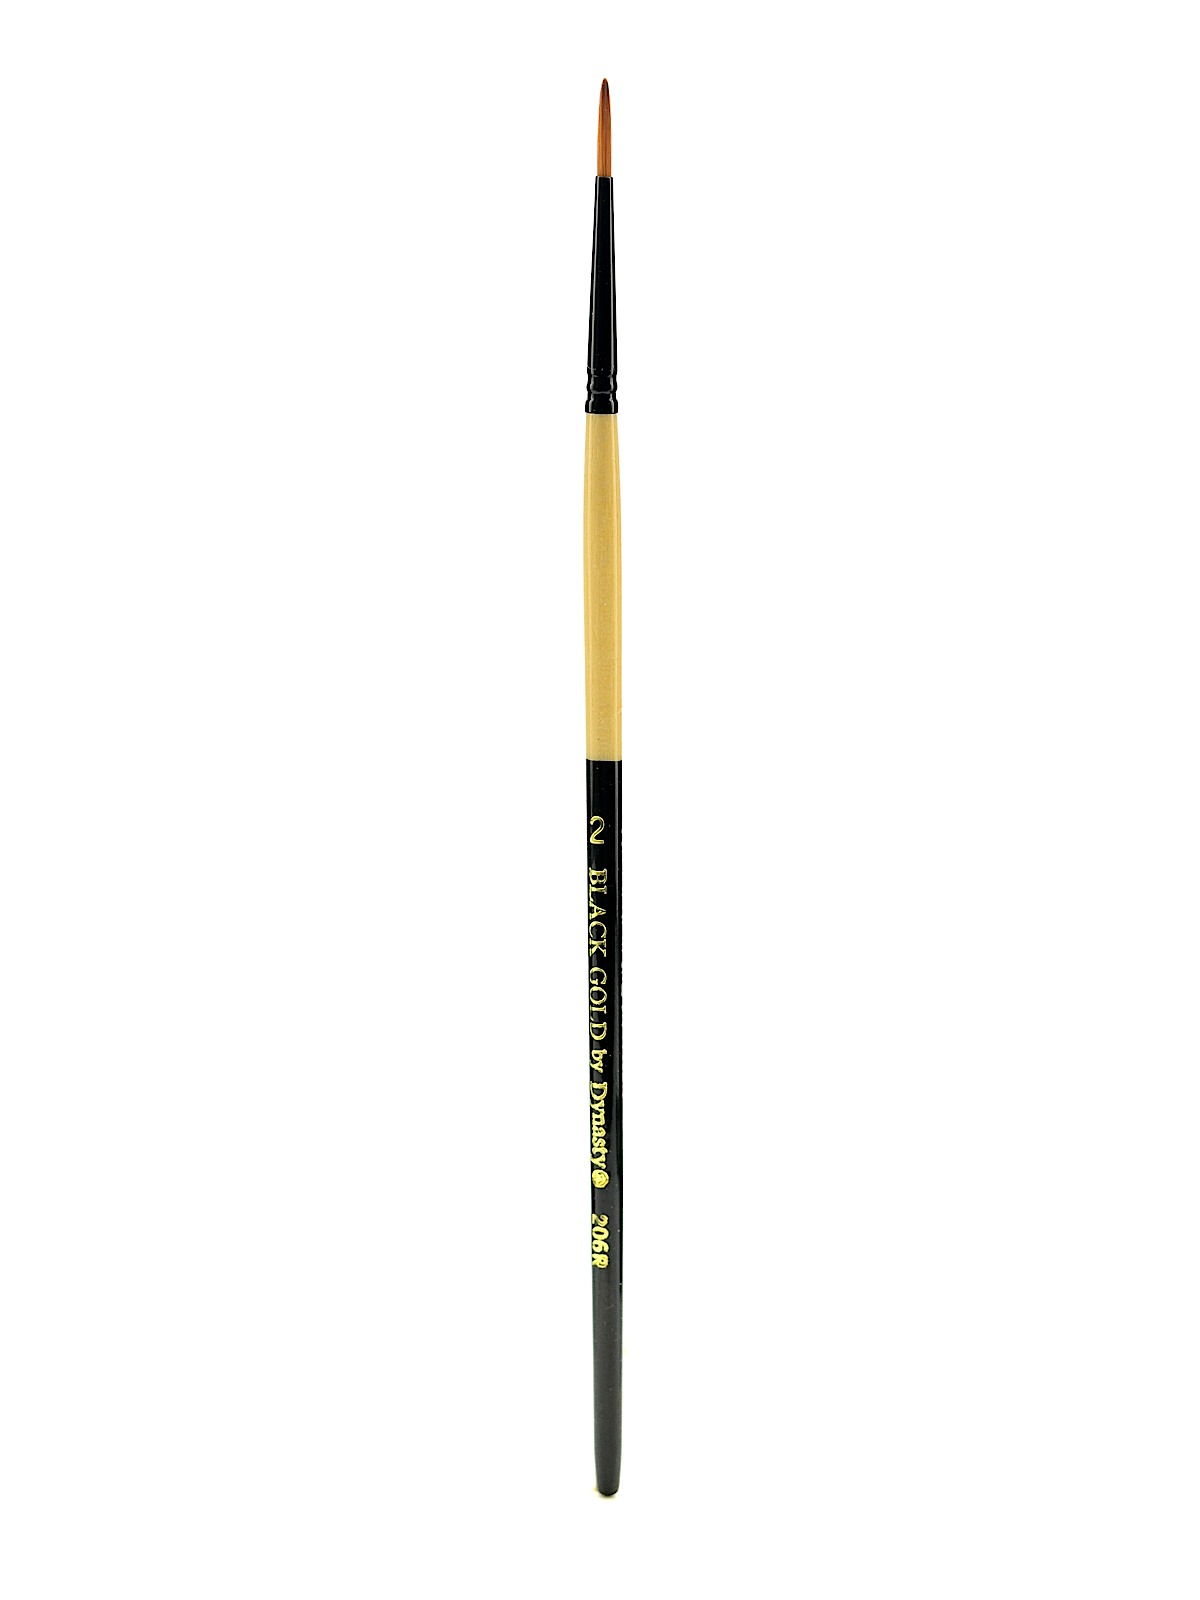 Black Gold Series Synthetic Brushes Short Handle 2 Round